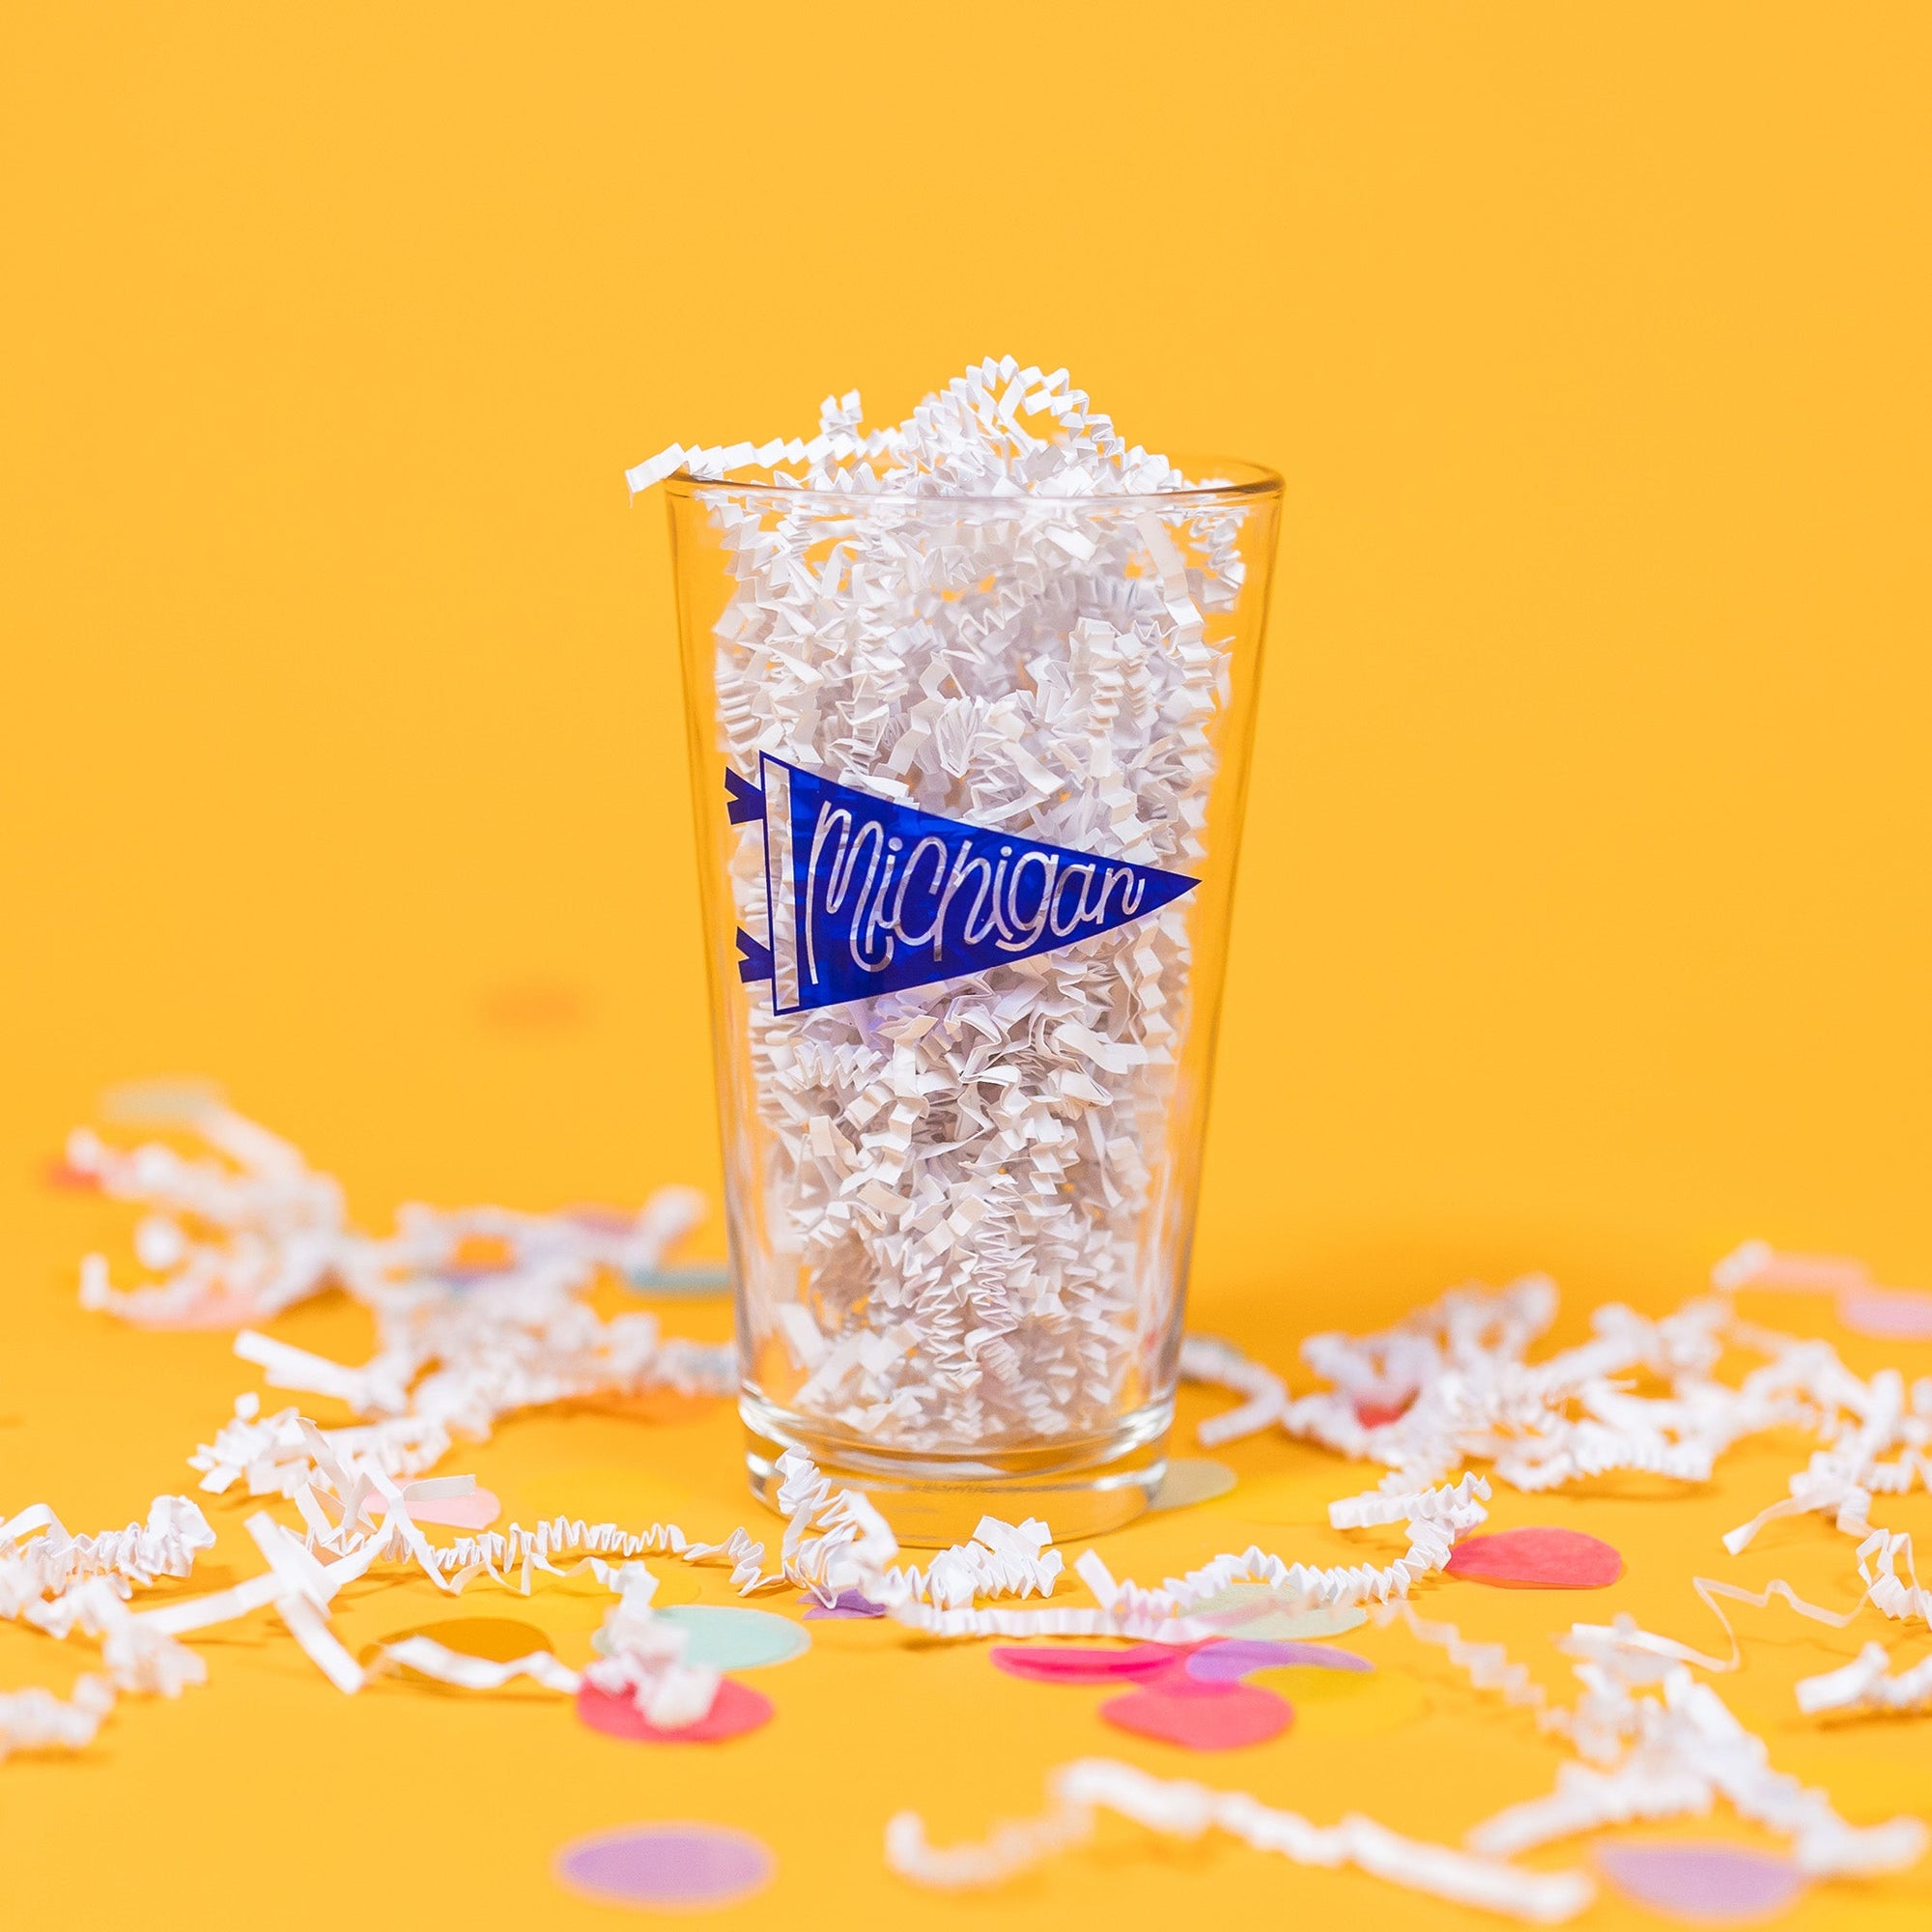 On a sunny mustard background sits a pint glass with white crinkle and big, colorful confetti scattered around. This beer pint glass is filled with white crinkle and it has a blue pennant that says "Michigan" in script hand lettering.